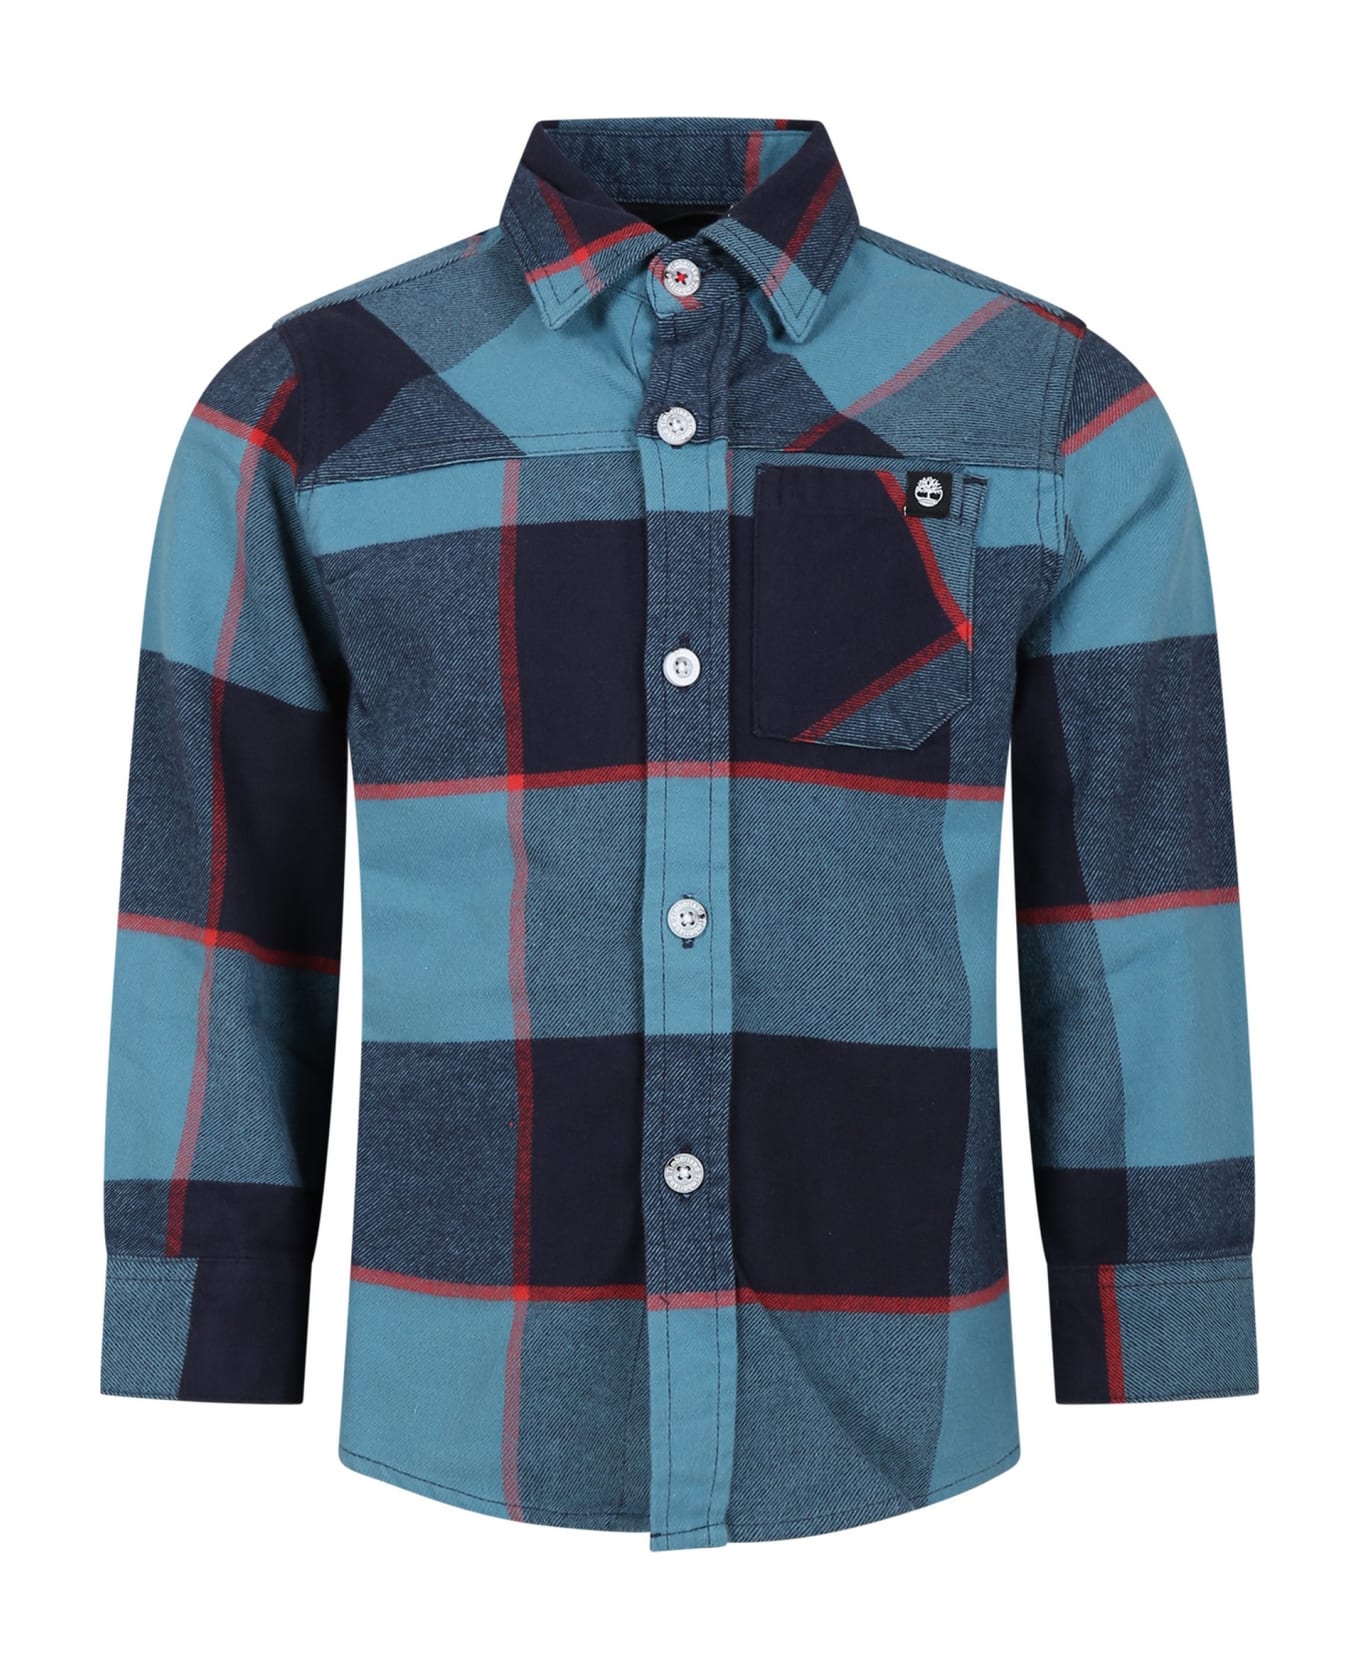 Timberland Blue Shirt For Boy With Logo - Blue シャツ